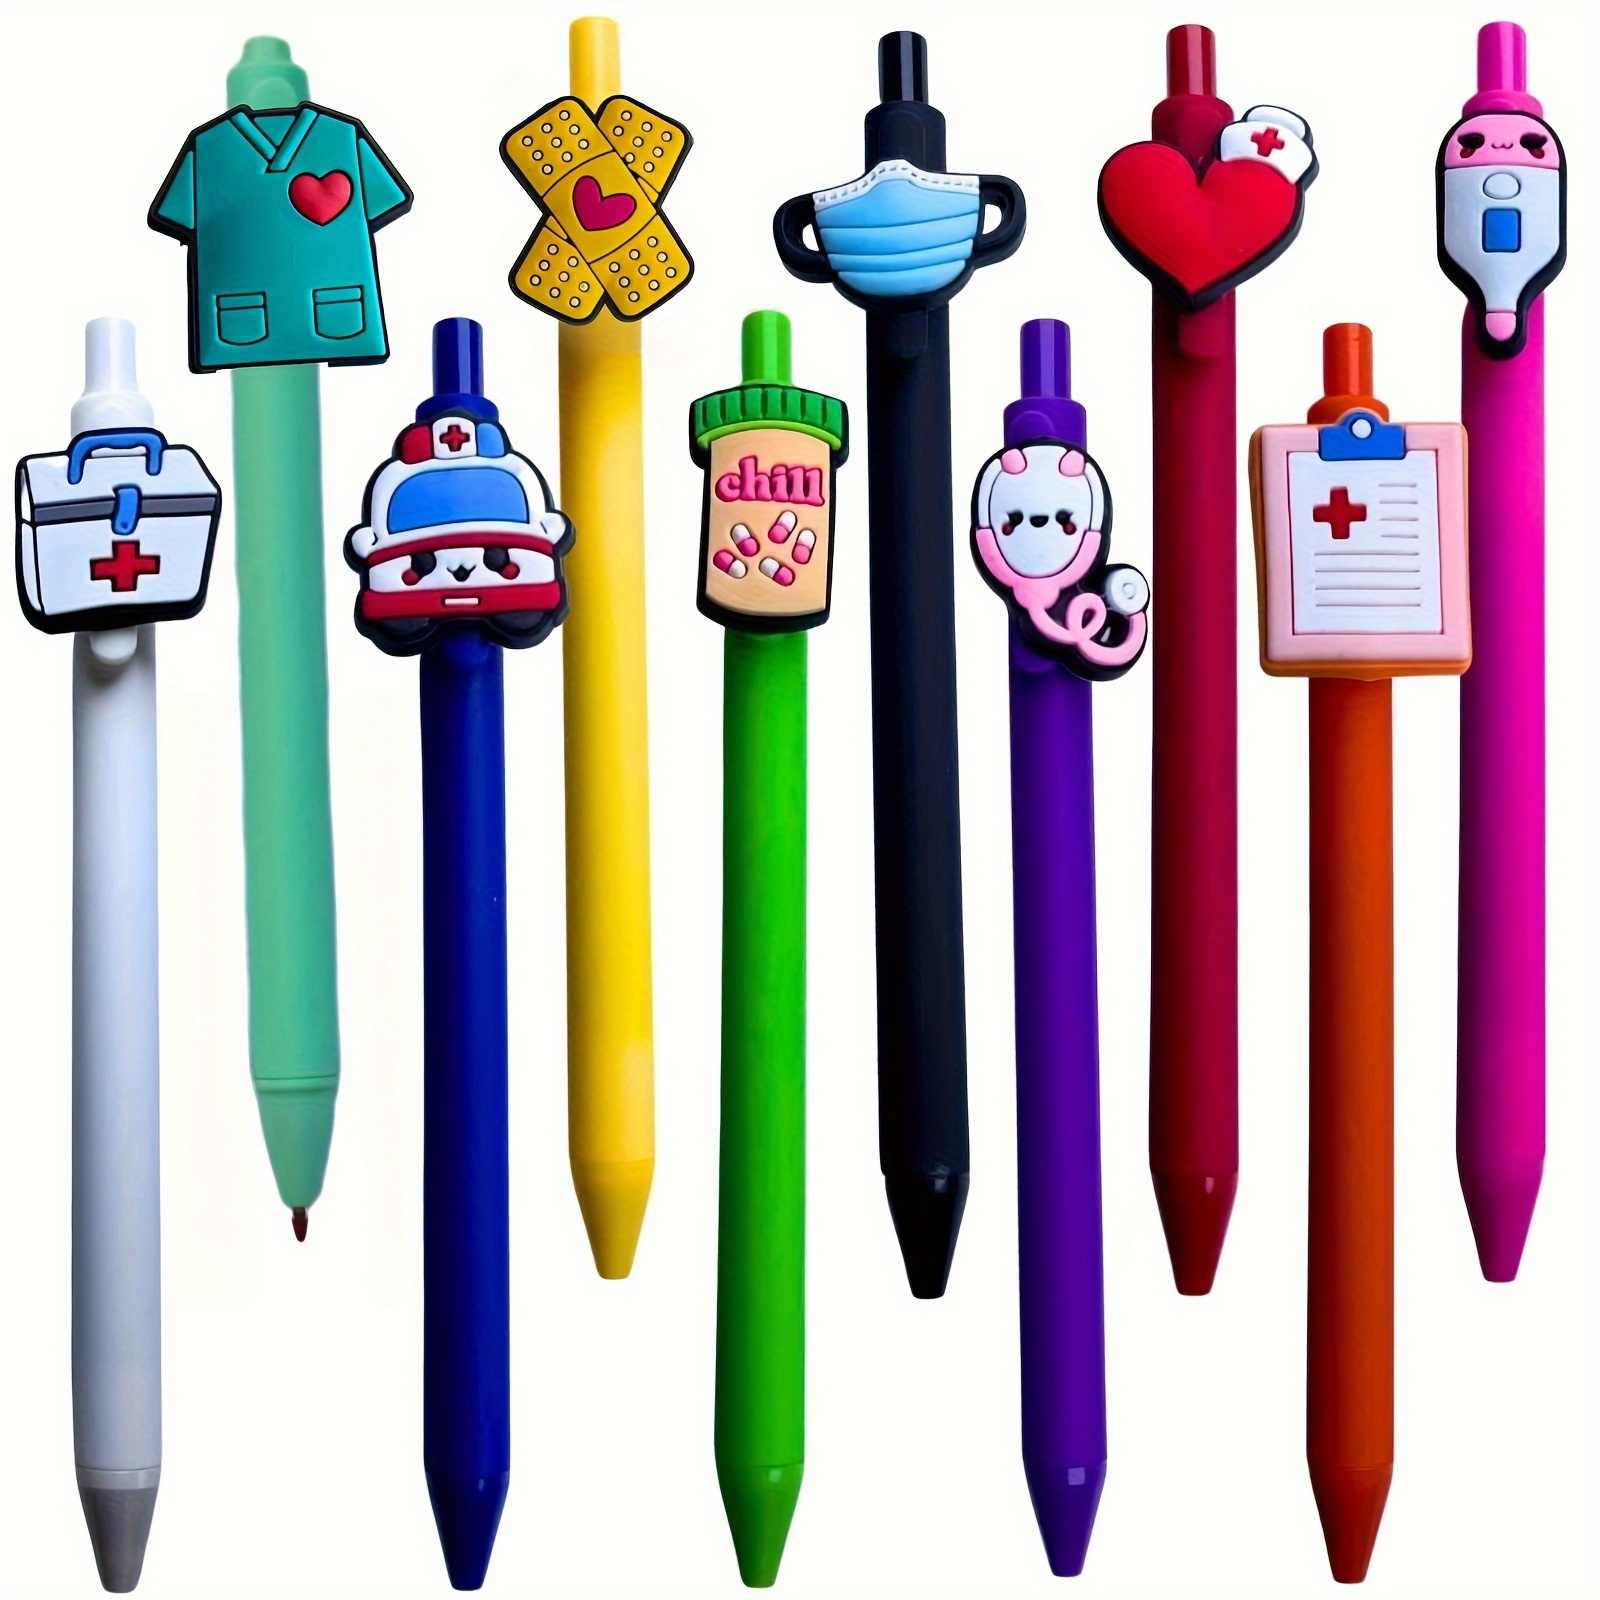 

10/5/3 Pack Nurse-themed Ballpoint Pens Set With Heart & Syringe Designs - Durable Plastic Material, Ideal For Medical Professionals, Office Decor, Nursing School Supplies, Gifts For 18+ Years